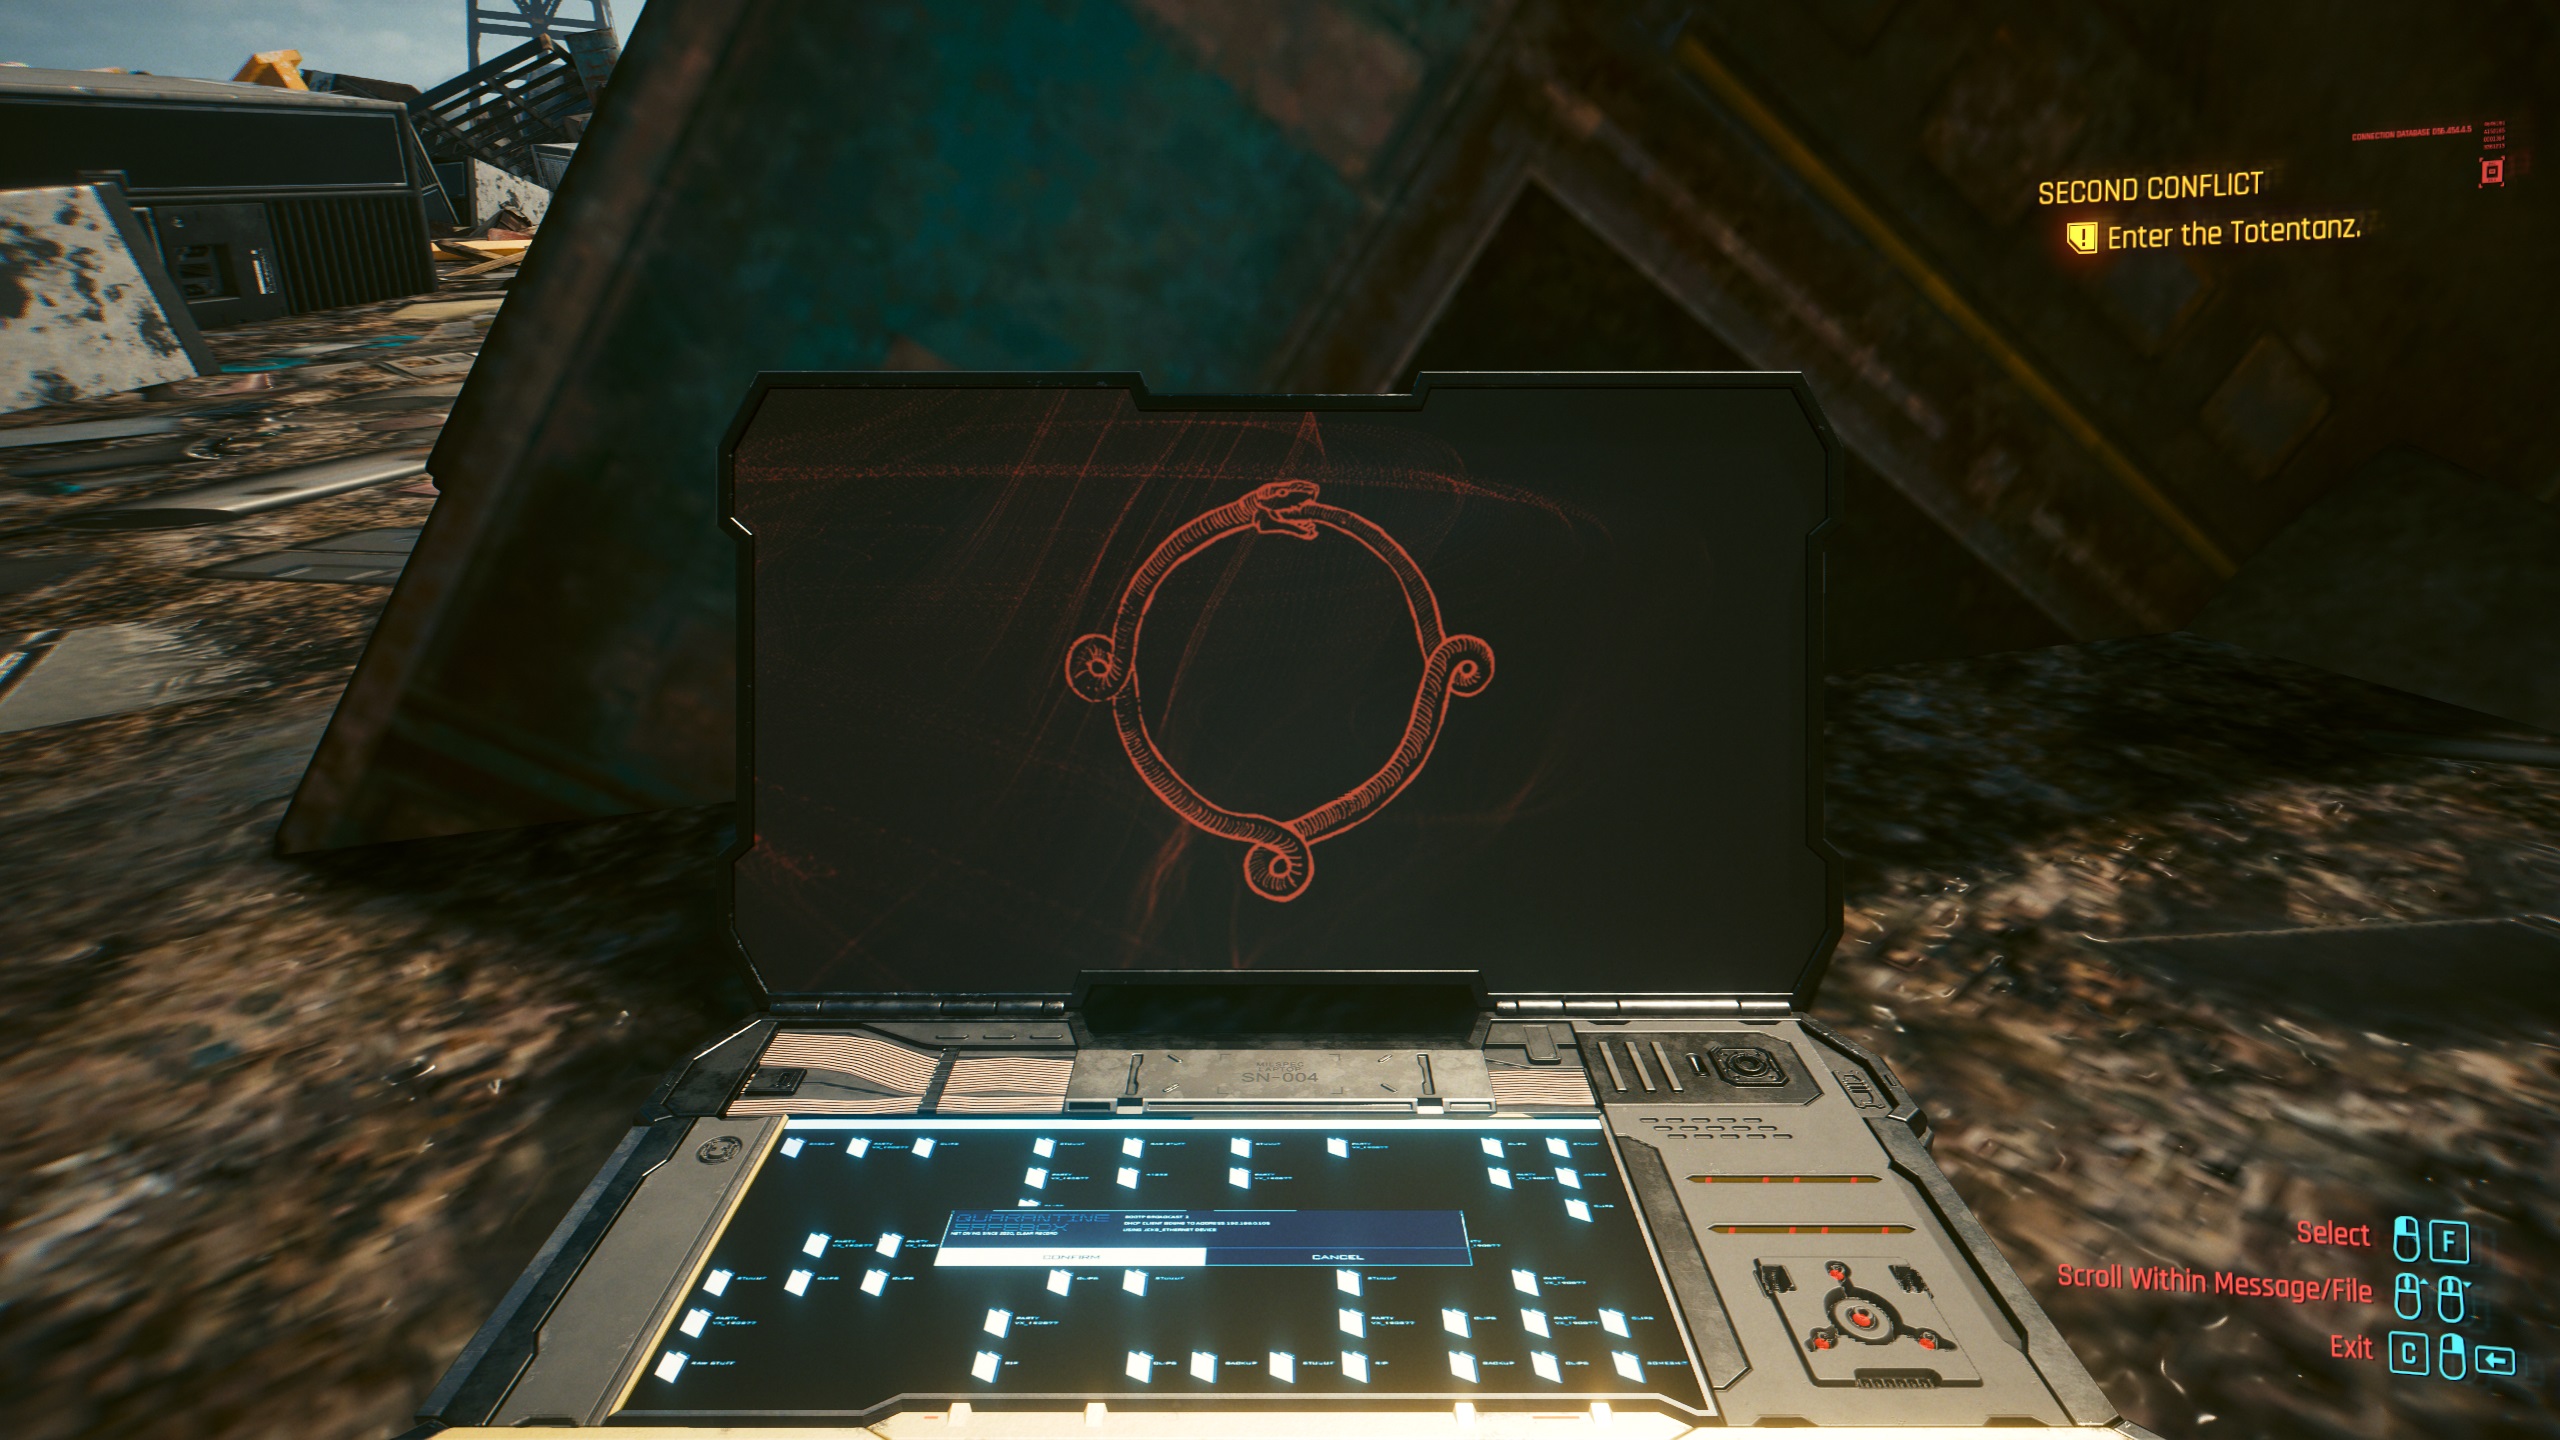 Cyberpunk 2.0 laptop with ancient Slavic symbols and ouroboros background